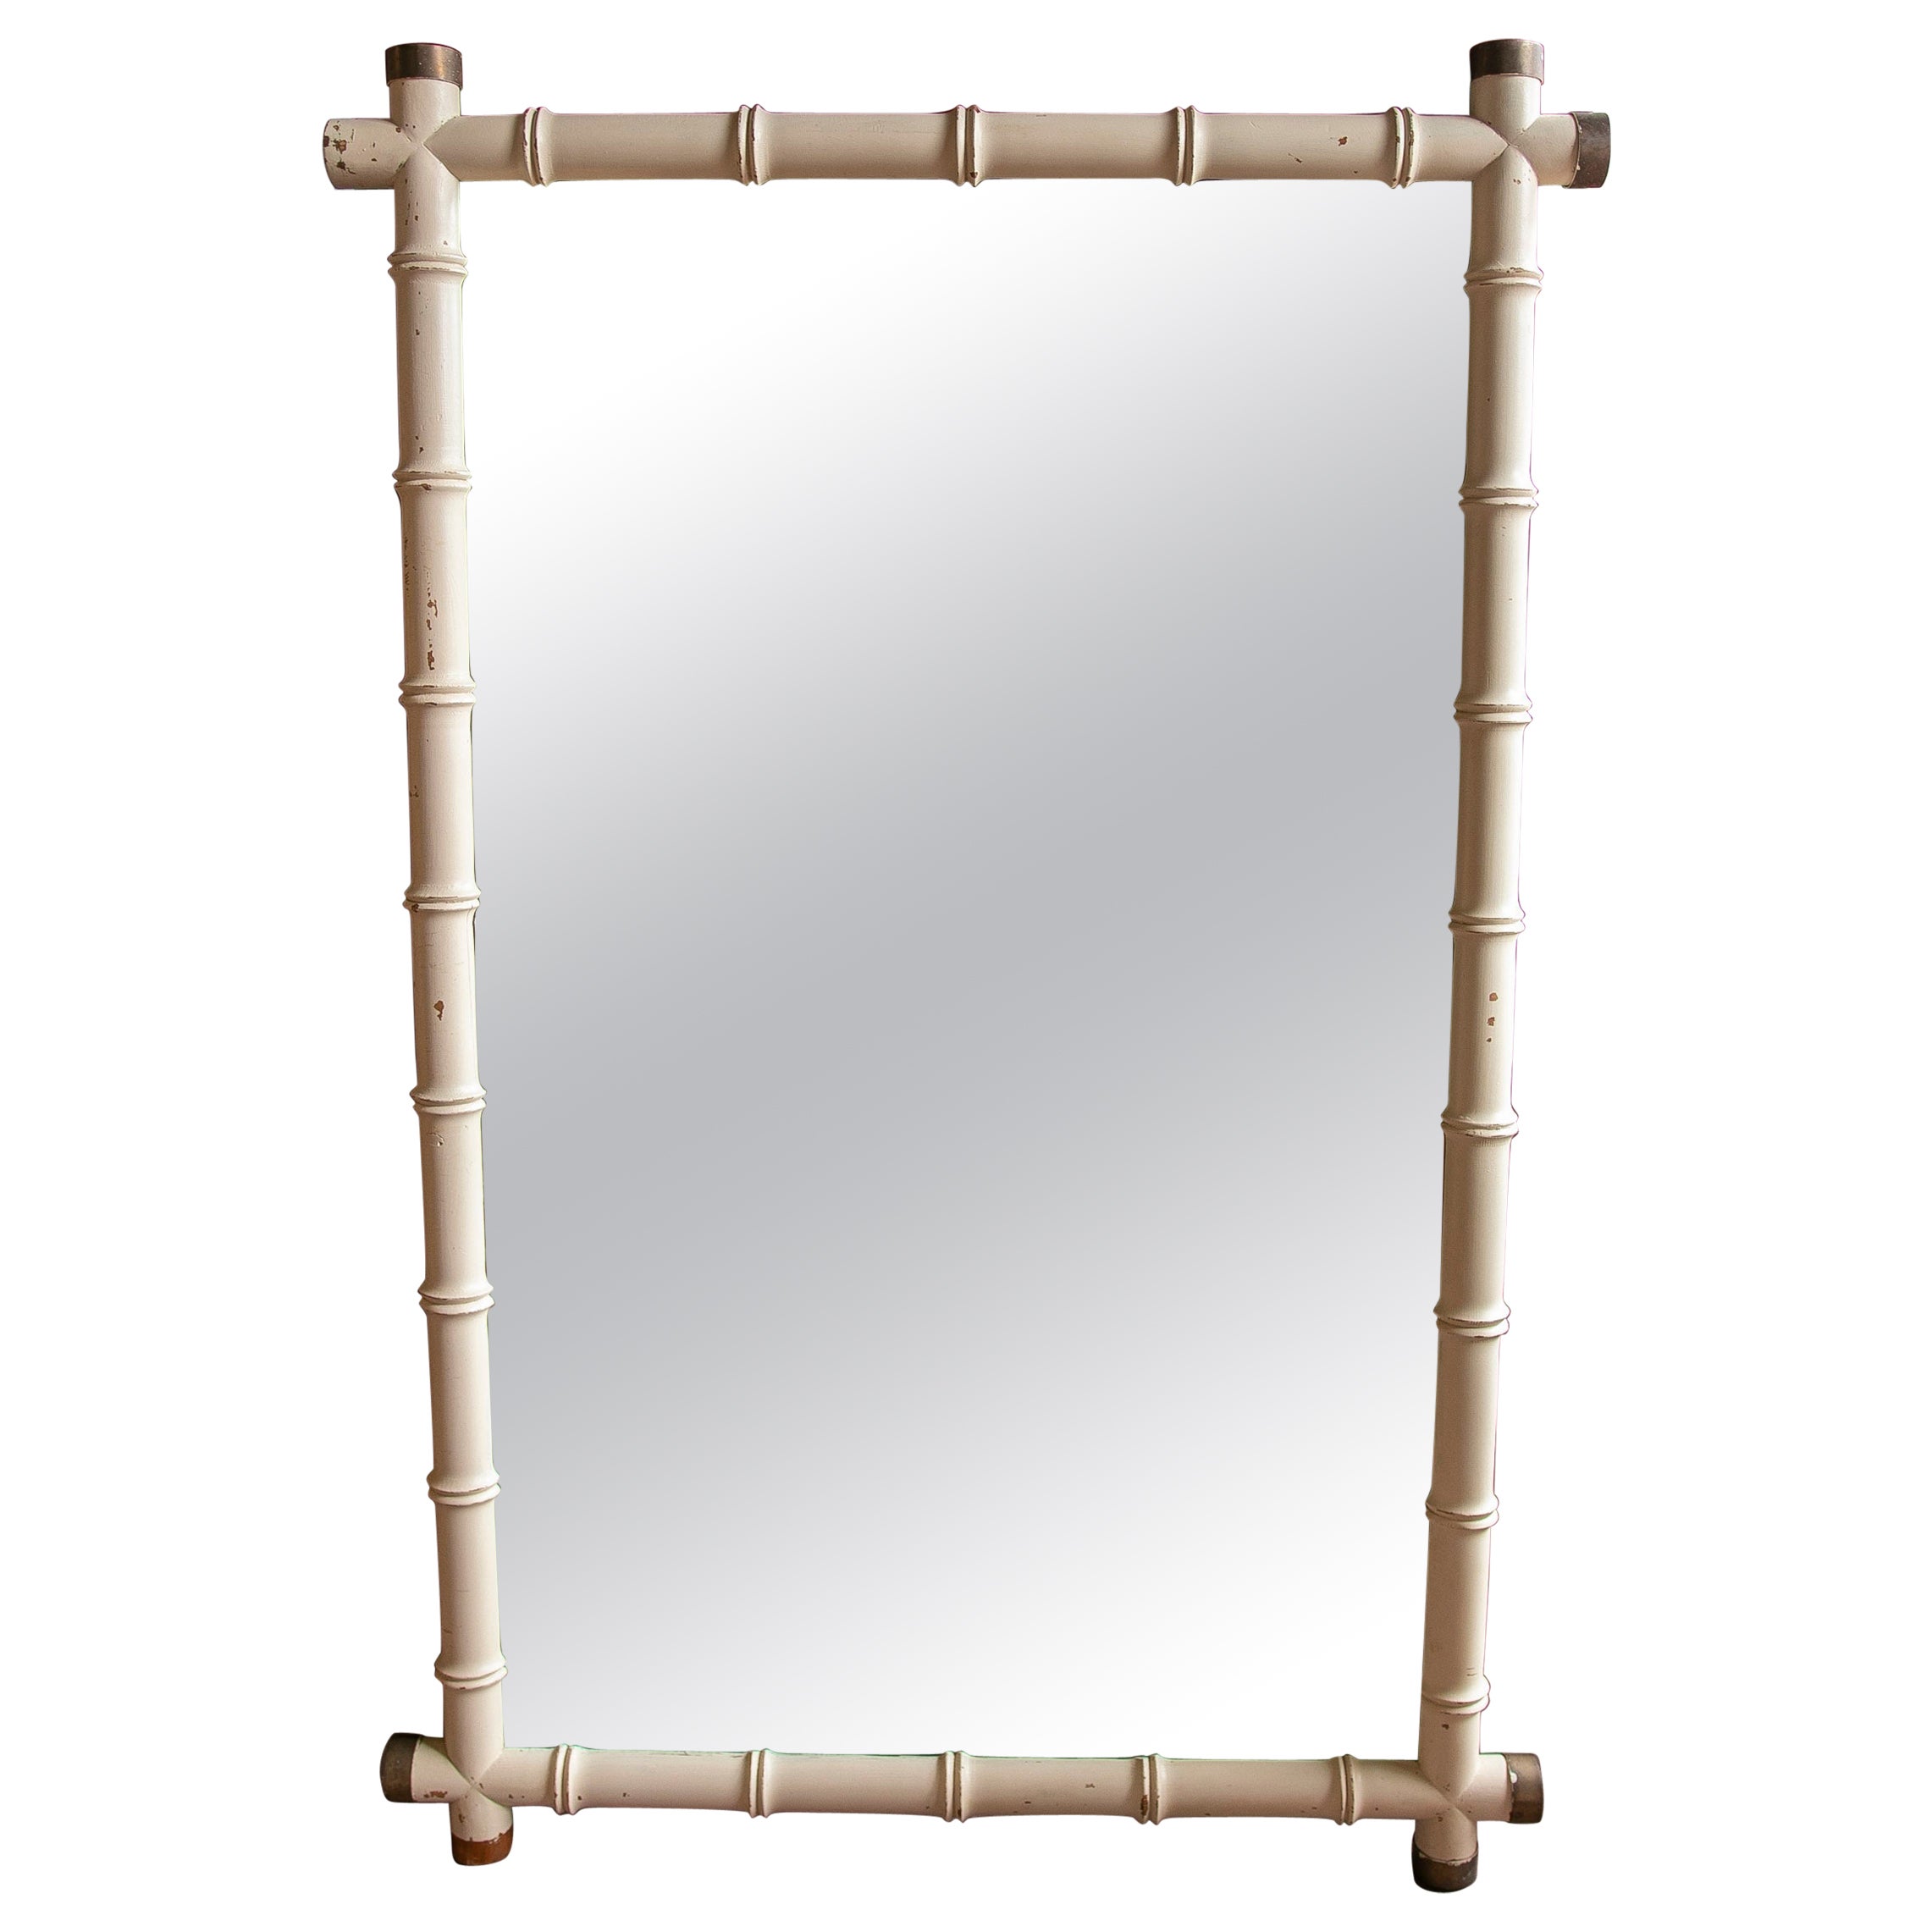 1970s Wooden Wall Mirror Imitating Bamboo with Brass Corners  For Sale